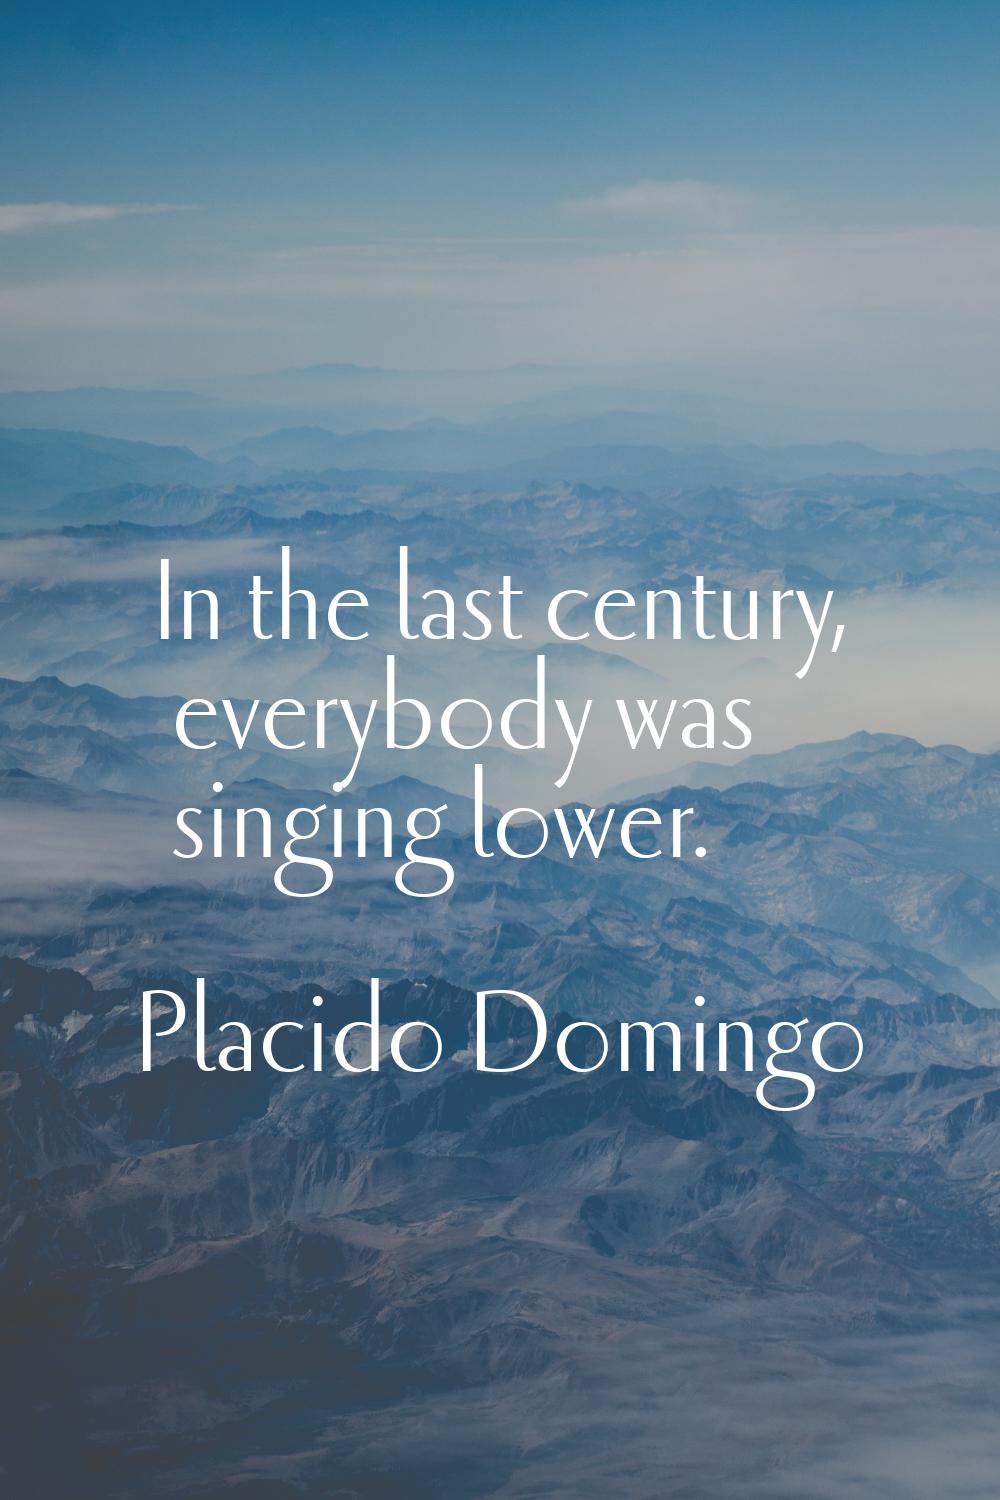 In the last century, everybody was singing lower.